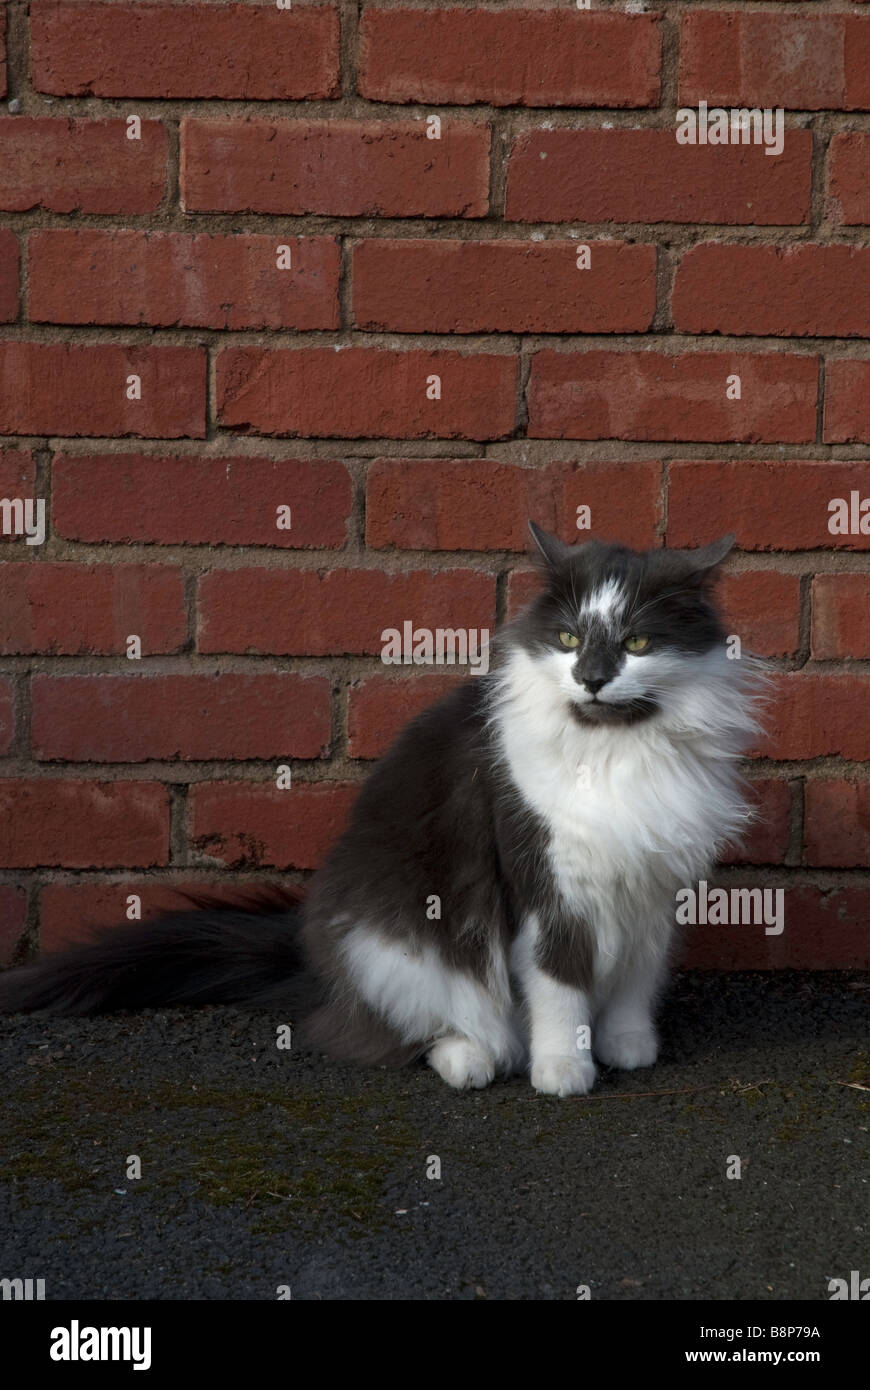 A grey and white long haired cat sitting by a wall Stock Photo